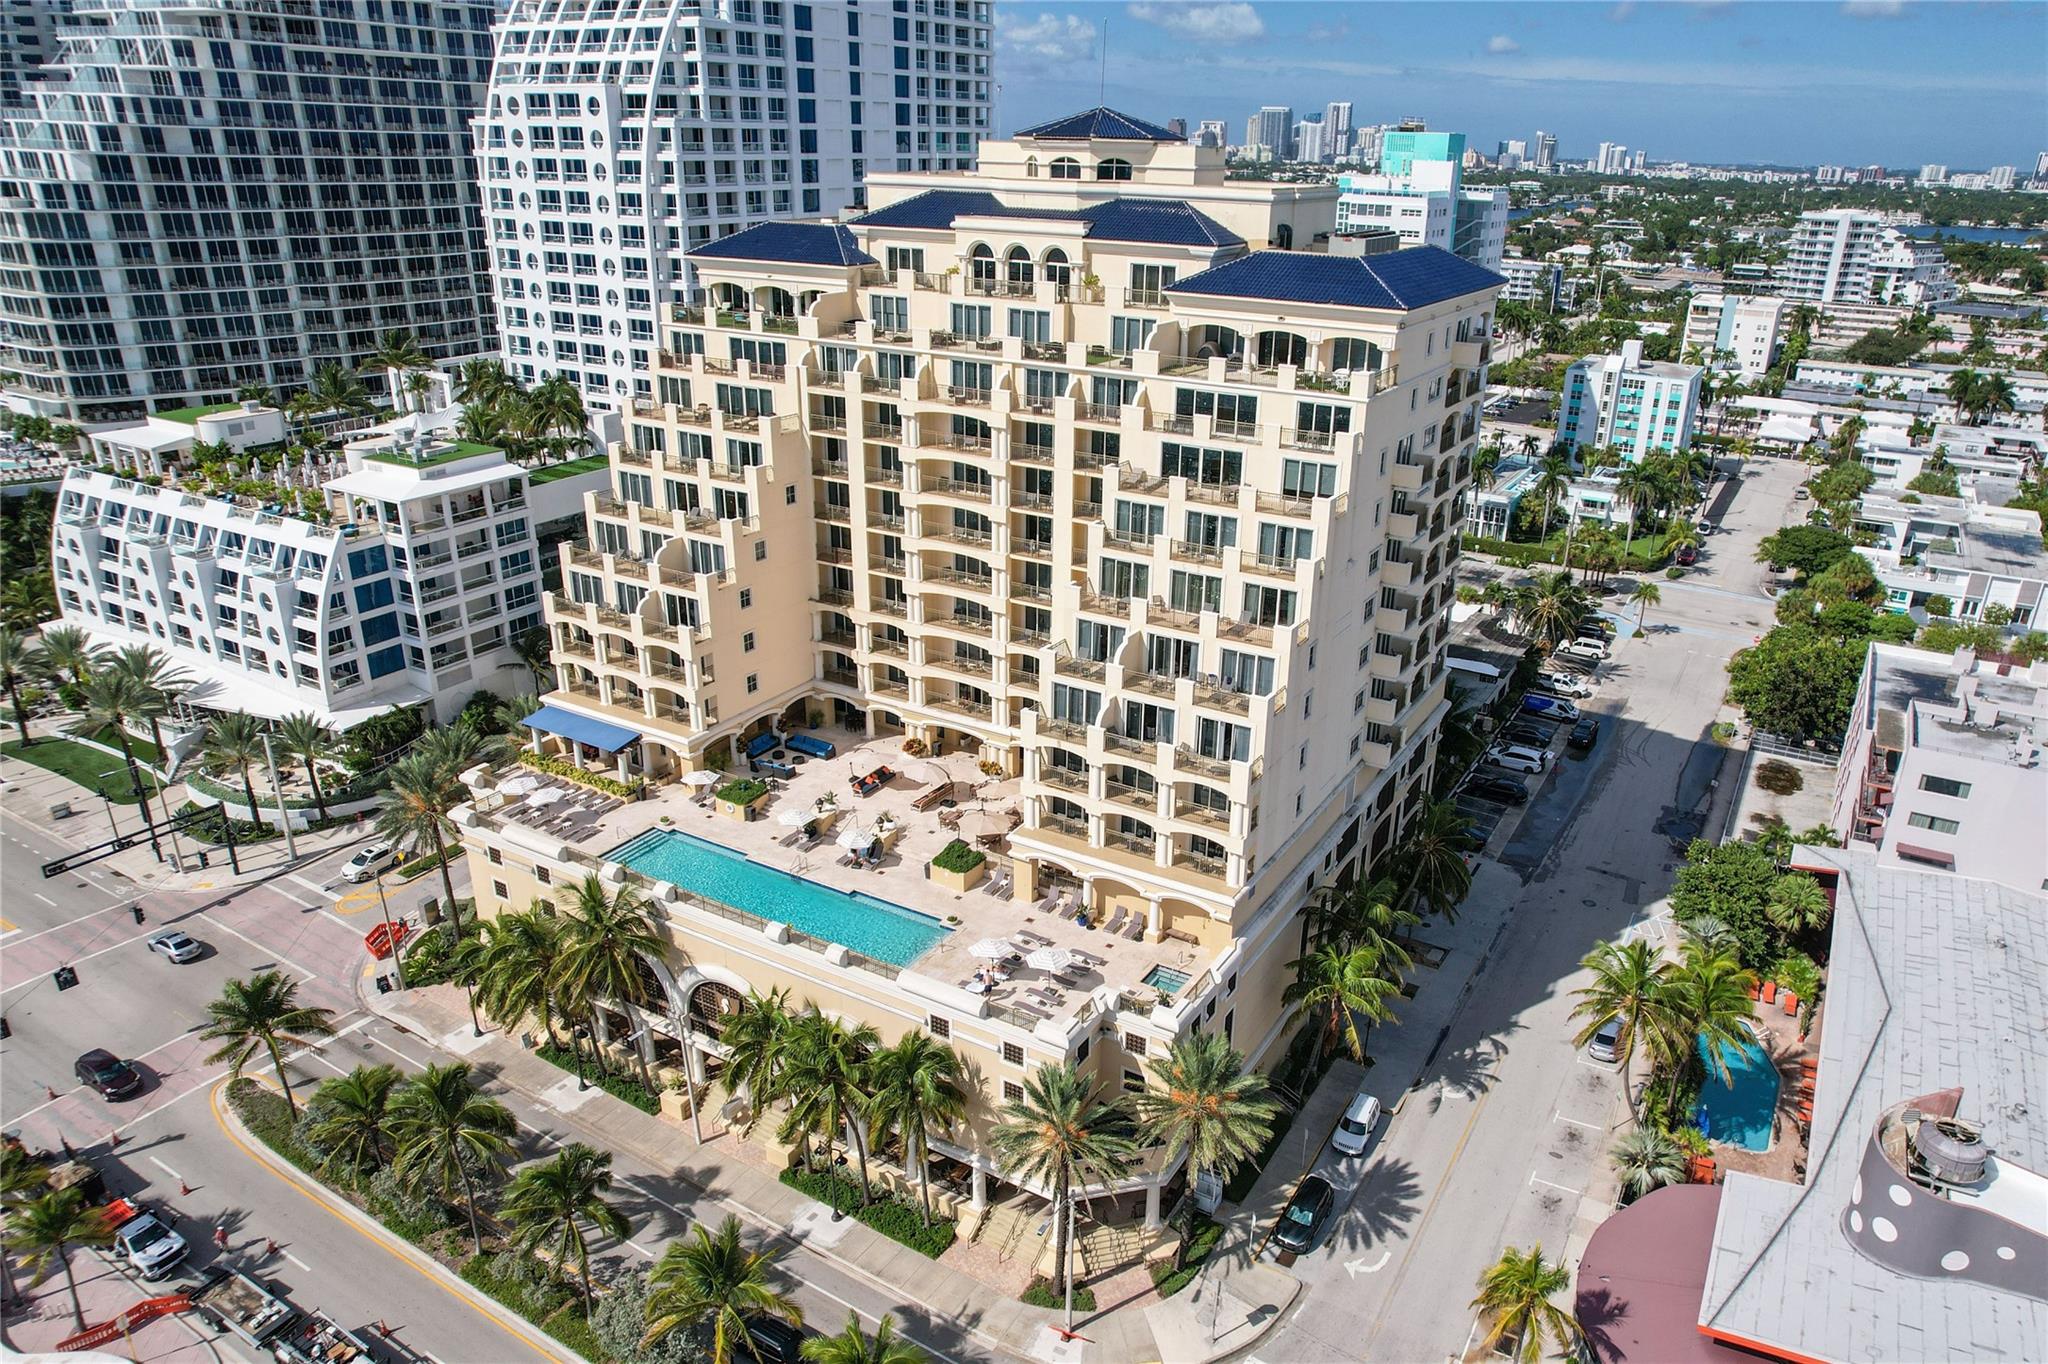 Property featured in Waterfront Condos in - Ft. Lauderdale under 1M #2